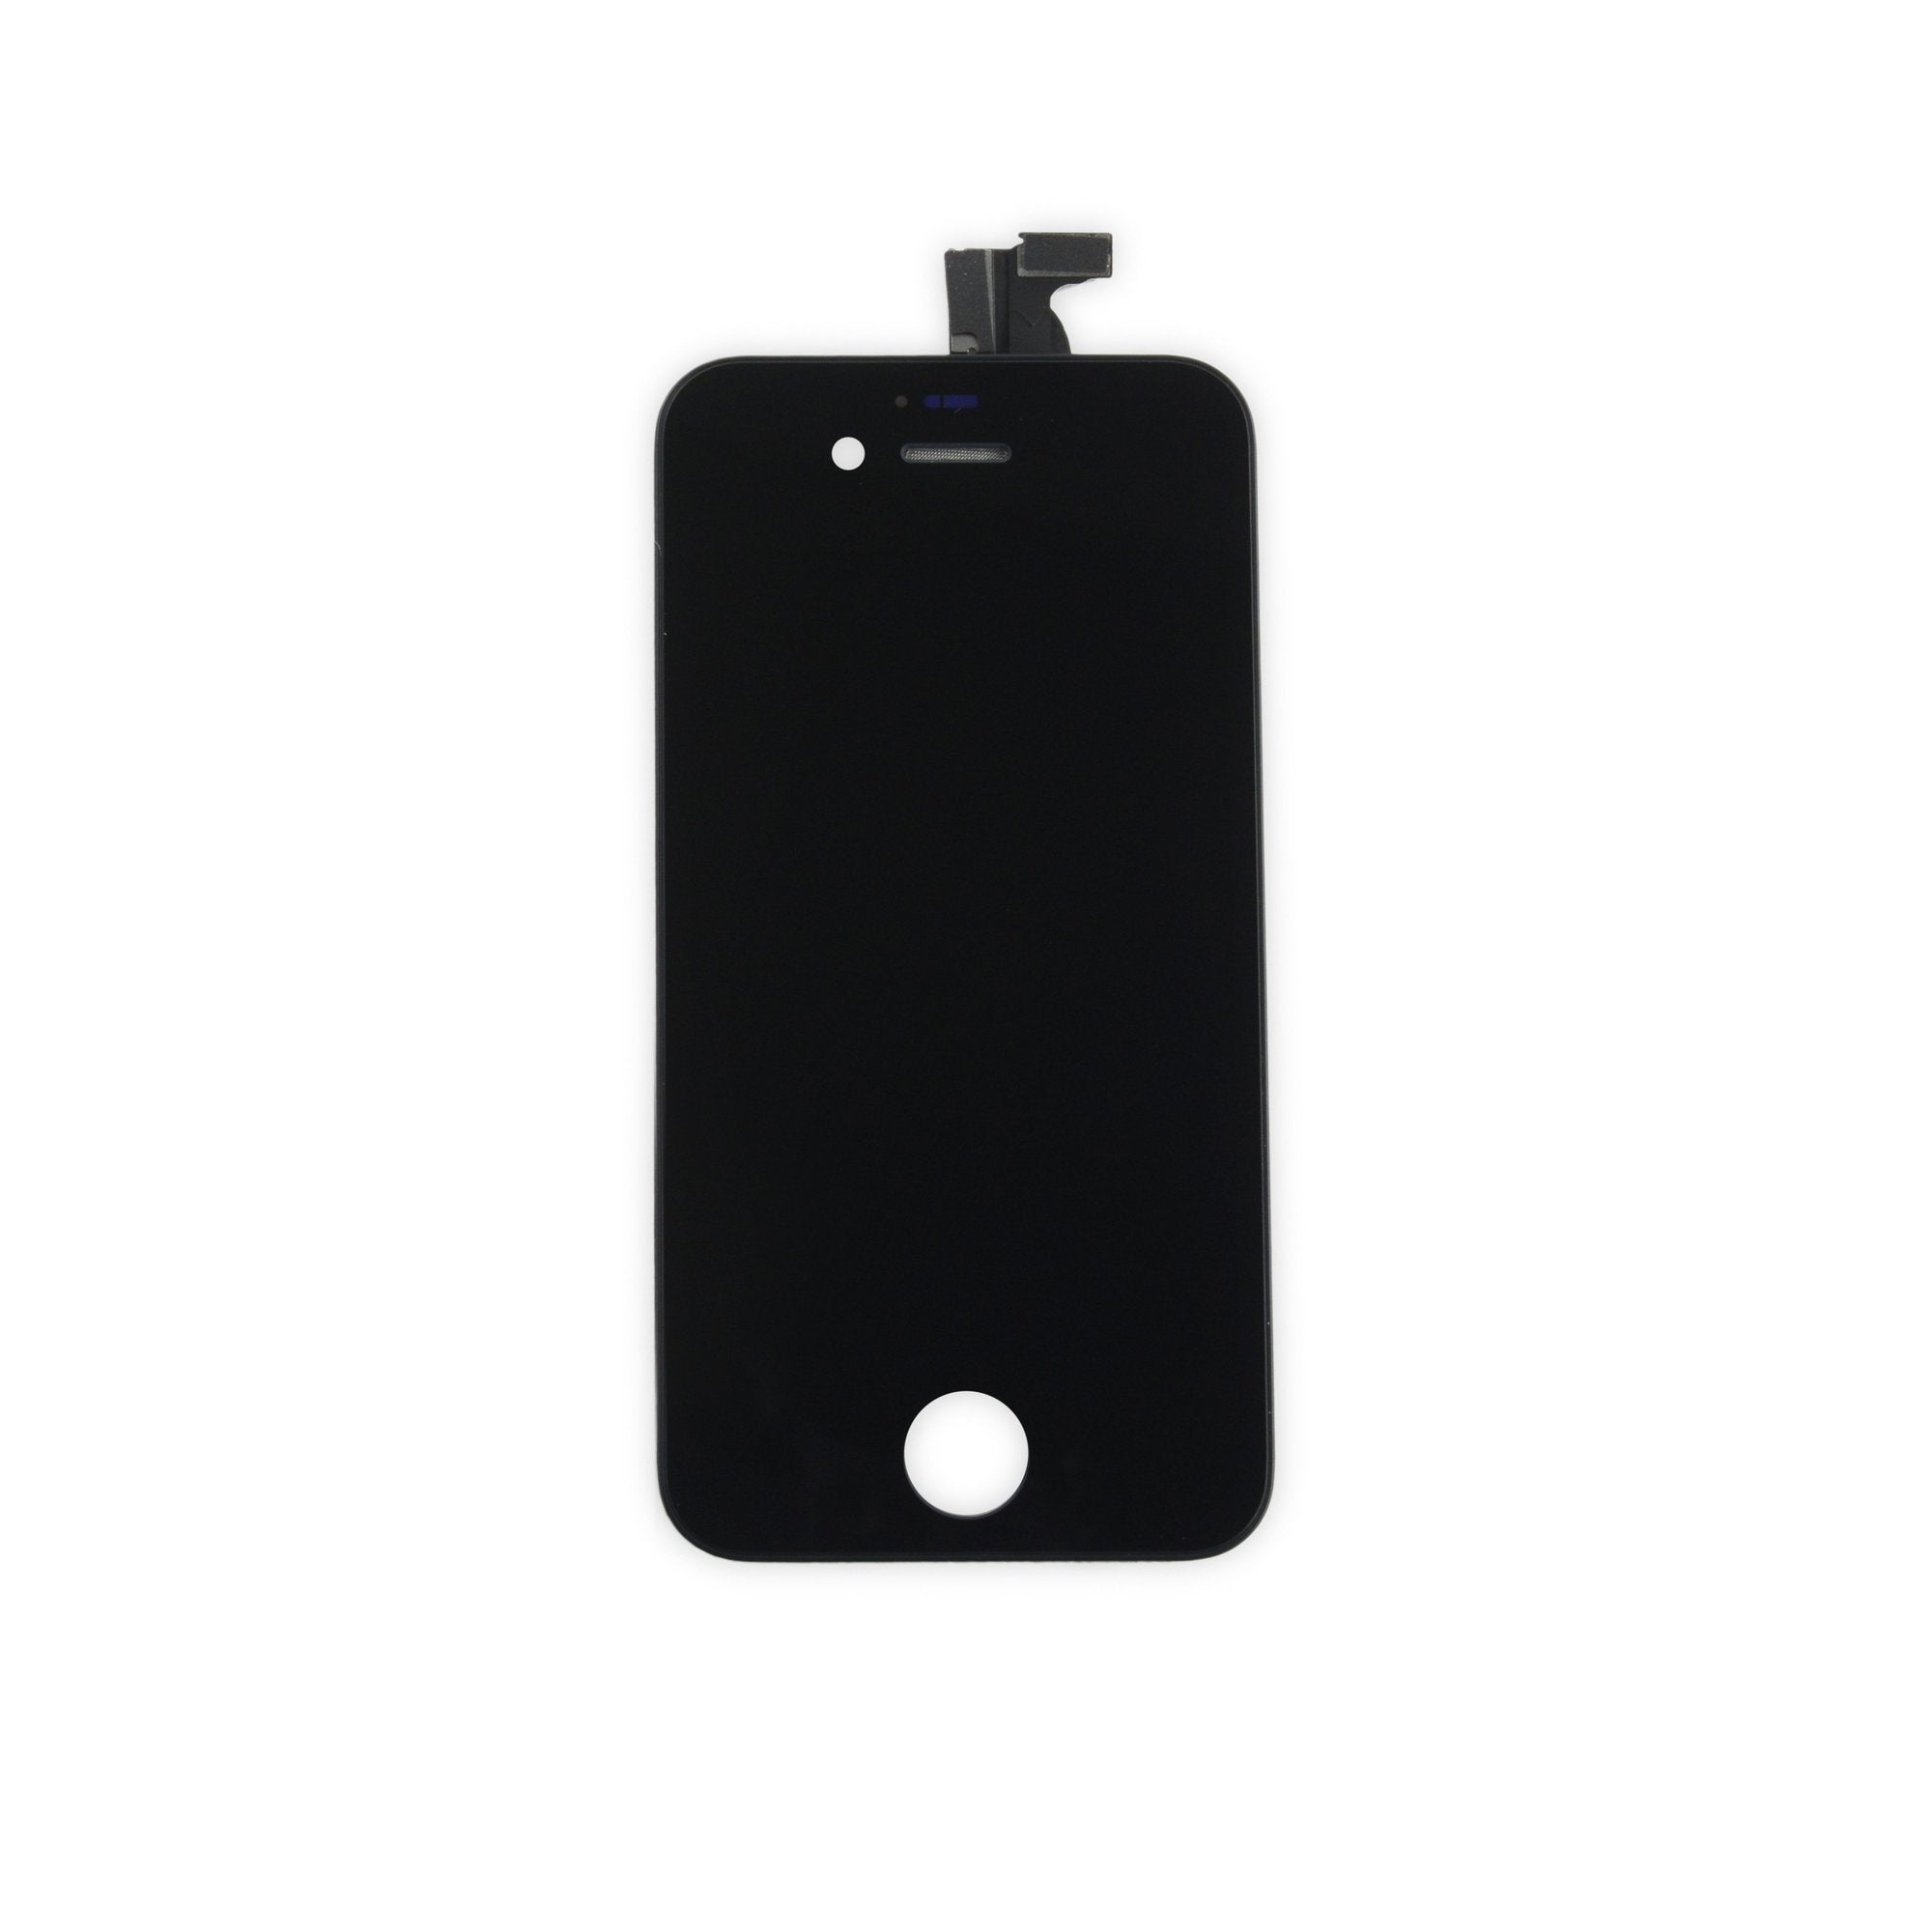 iPhone 4S Screen Black New Part Only